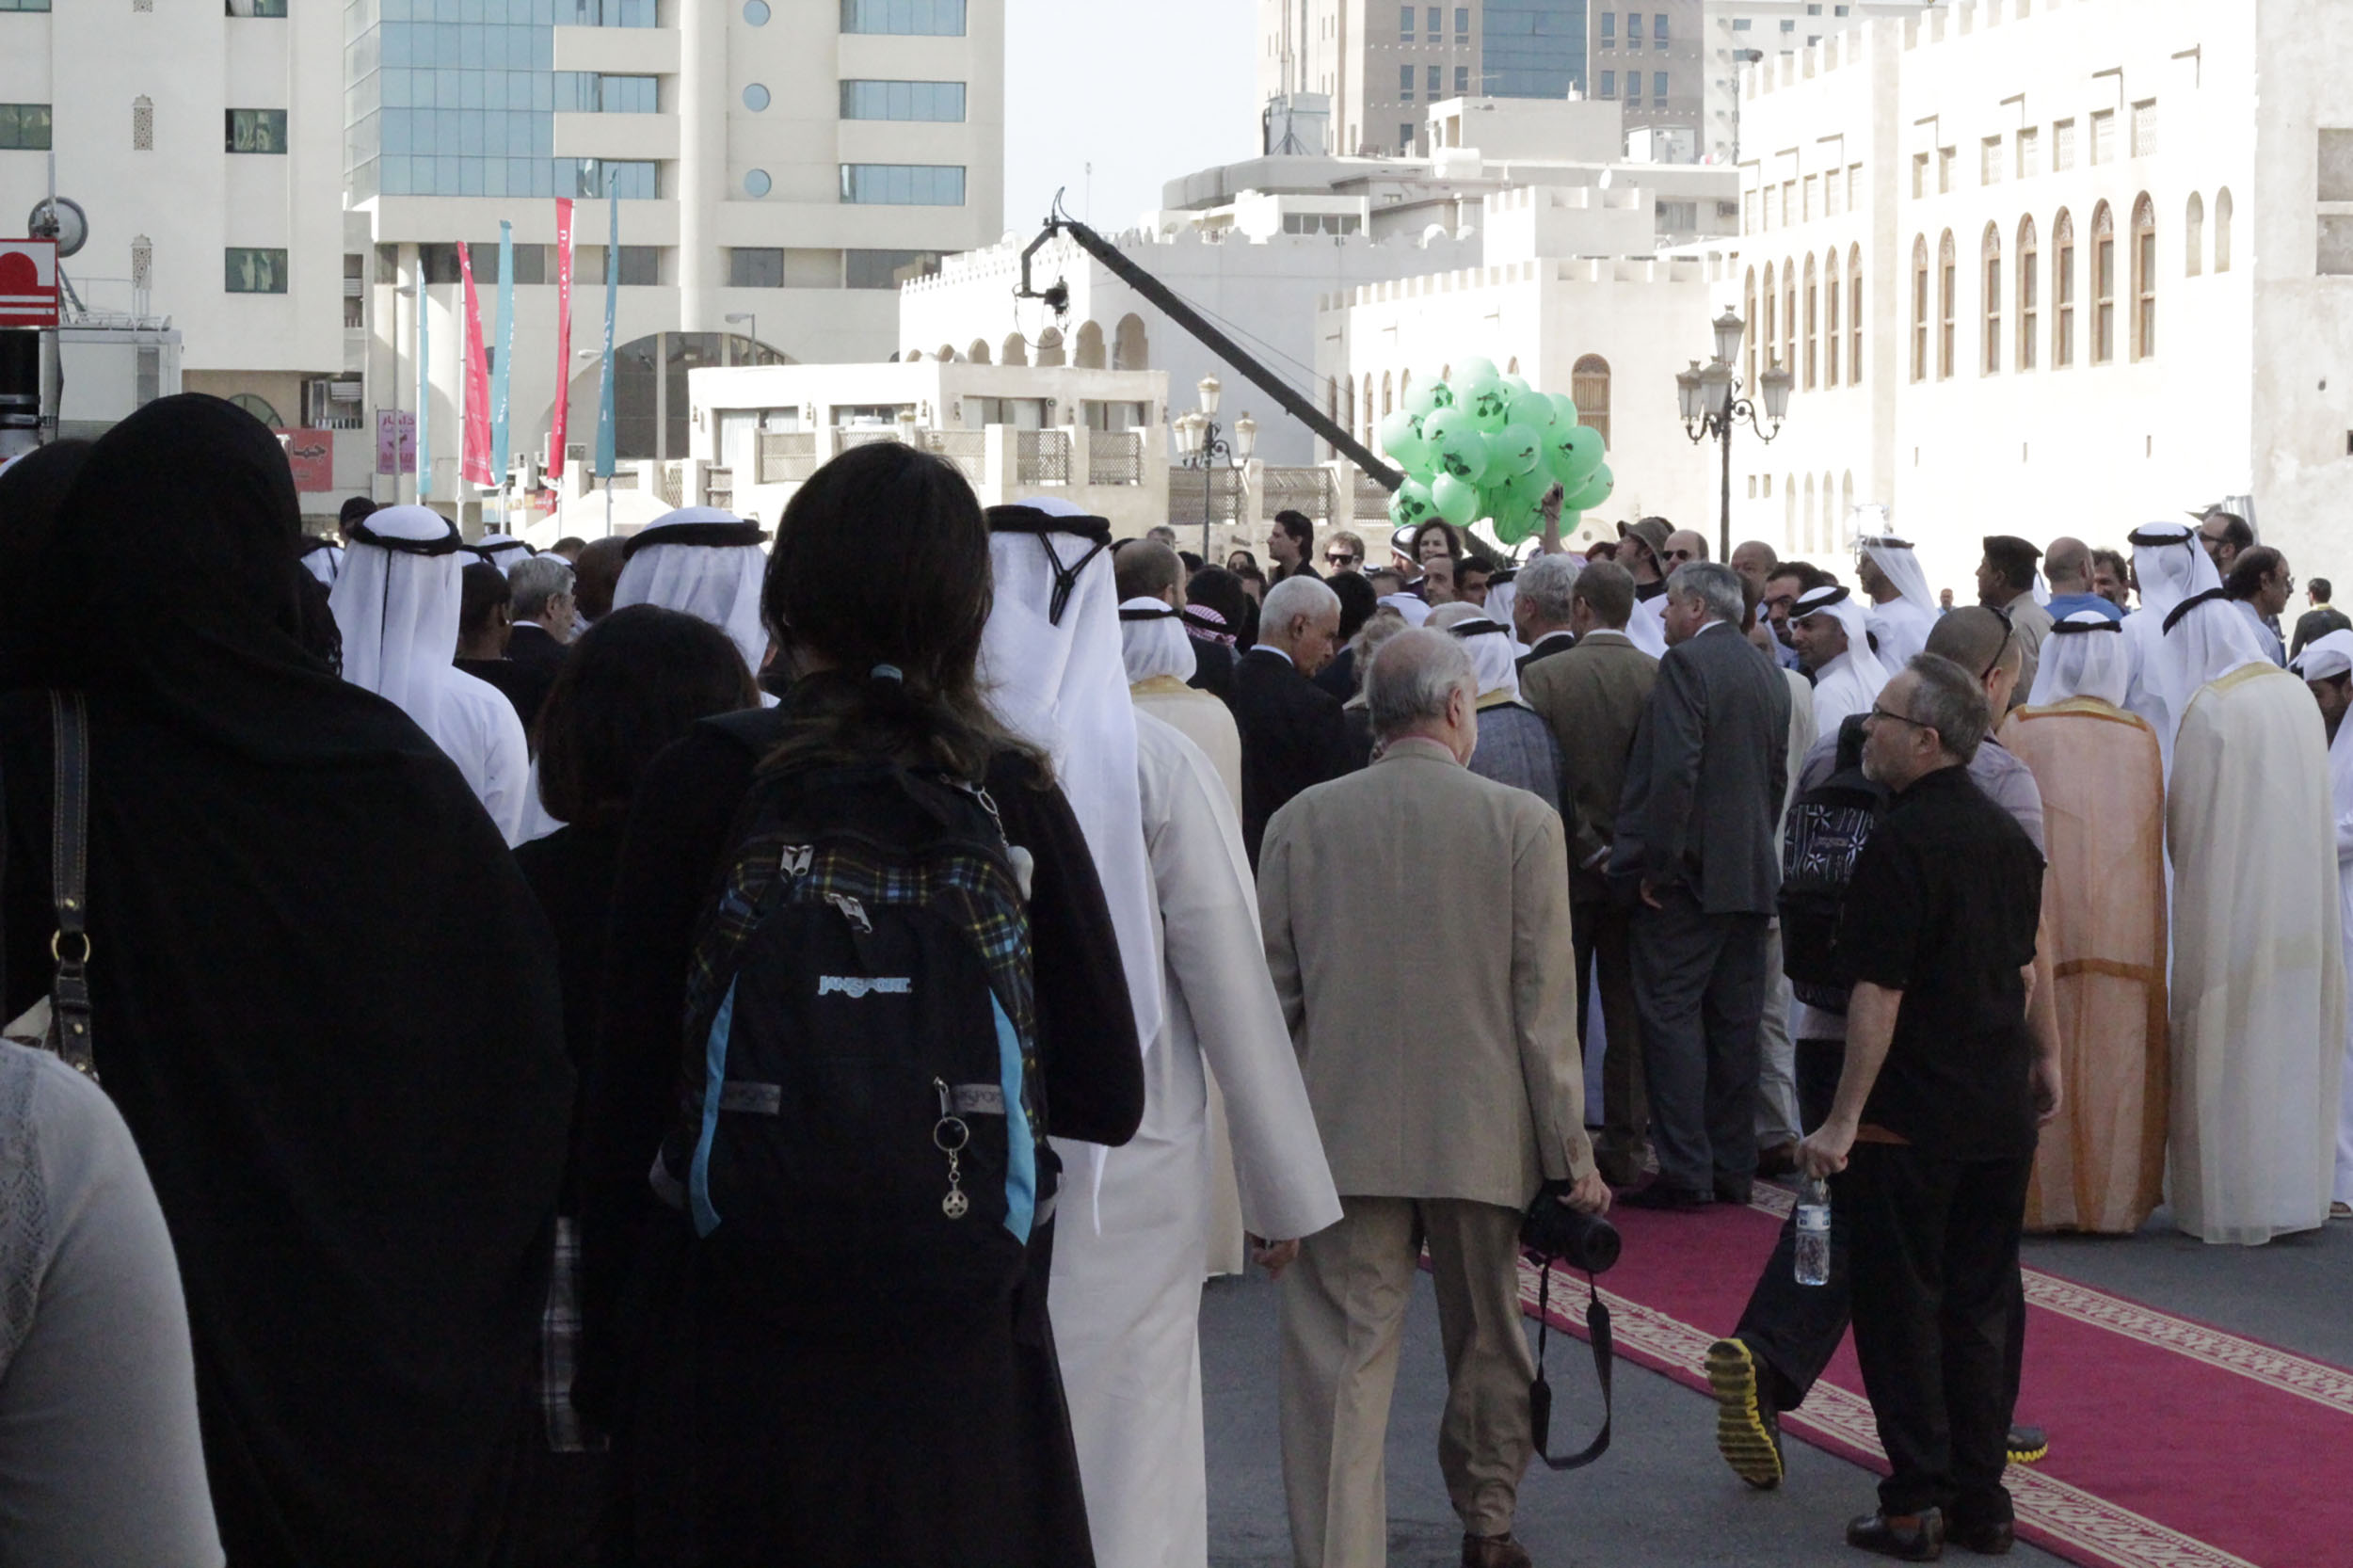 Opening of the 10th Sharjah Biennial, 2011. Photo: Richard Ibghy & Marilou Lemmens